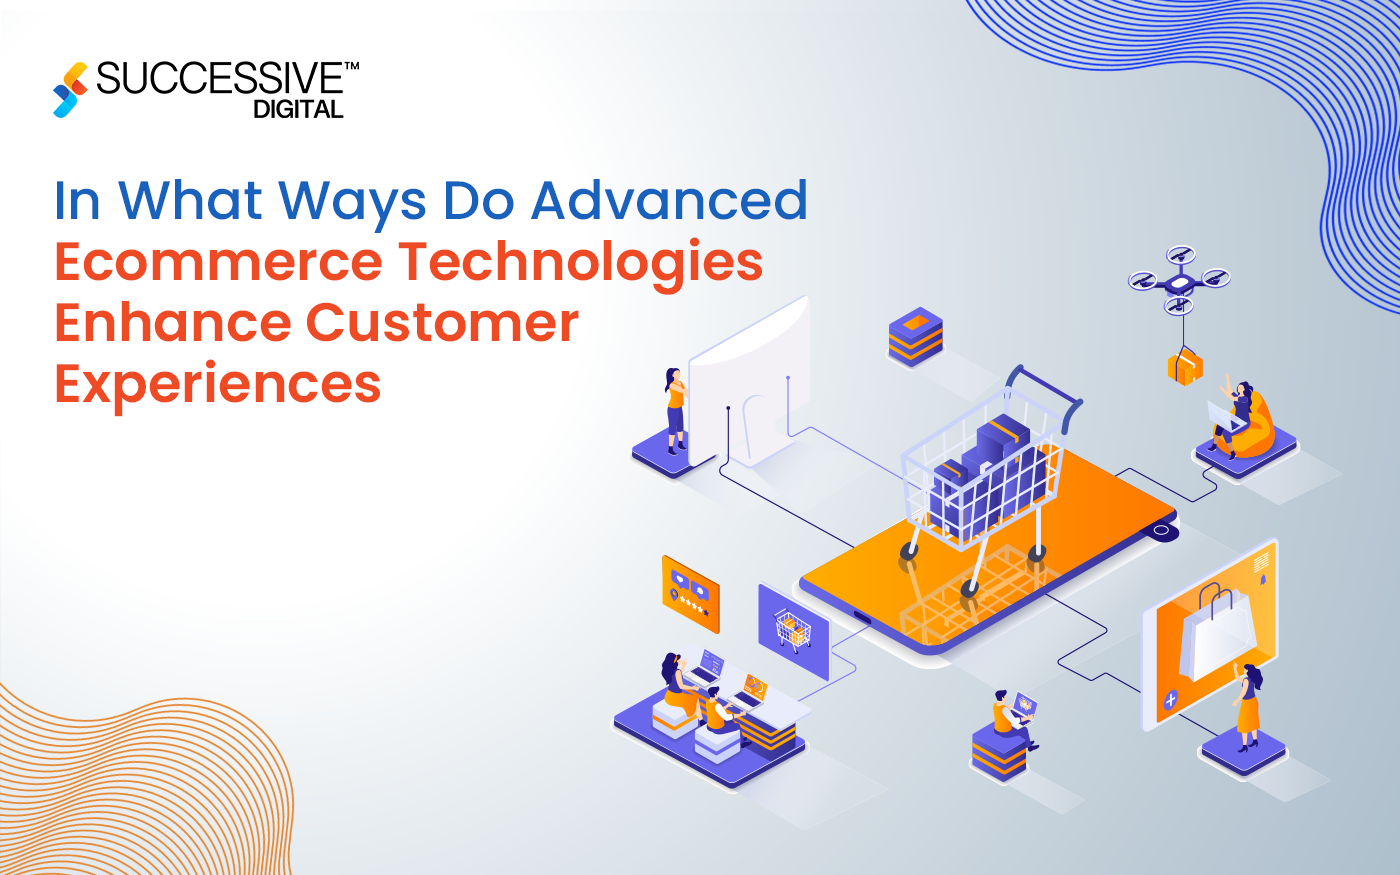 In What Ways Do Advanced eCommerce Technologies Enhance Customer Experiences?